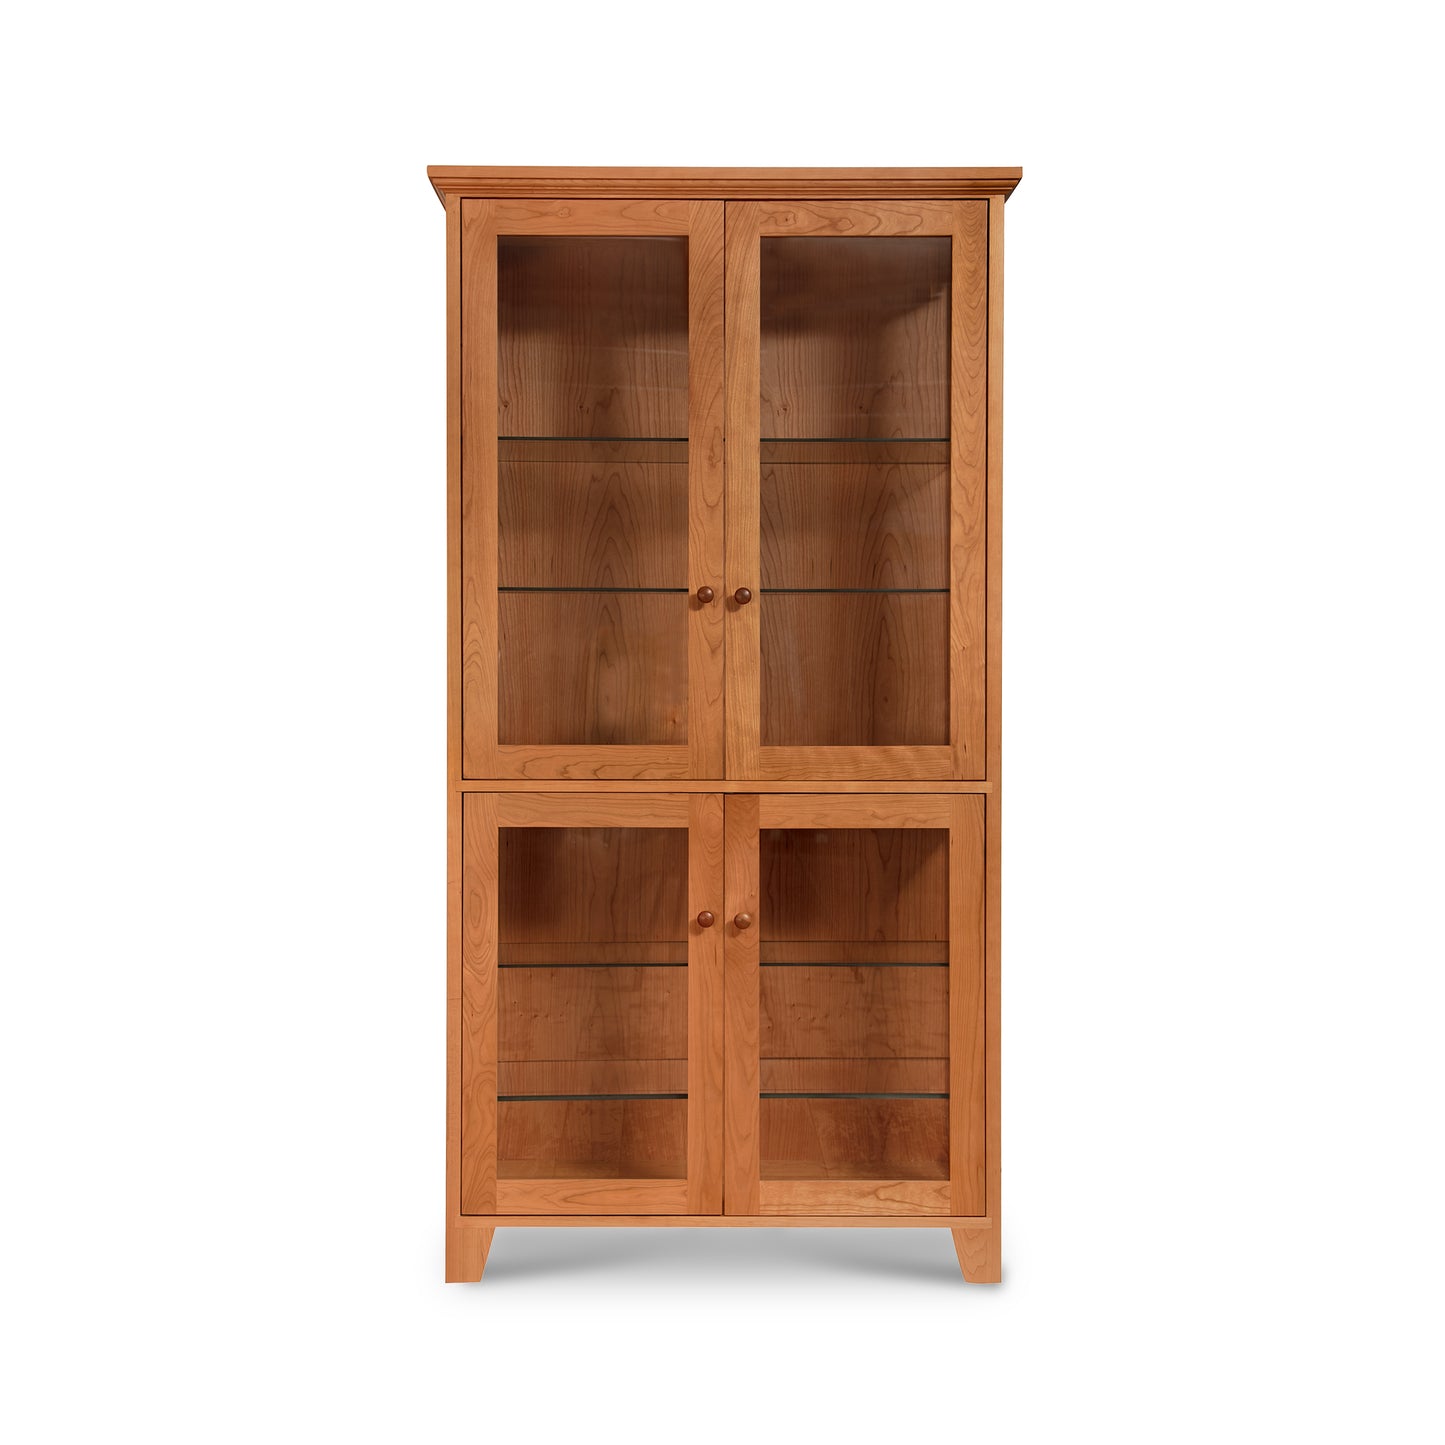 A handcrafted Lyndon Furniture Classic Vermont curio cabinet made from sustainable wood, featuring glass doors.